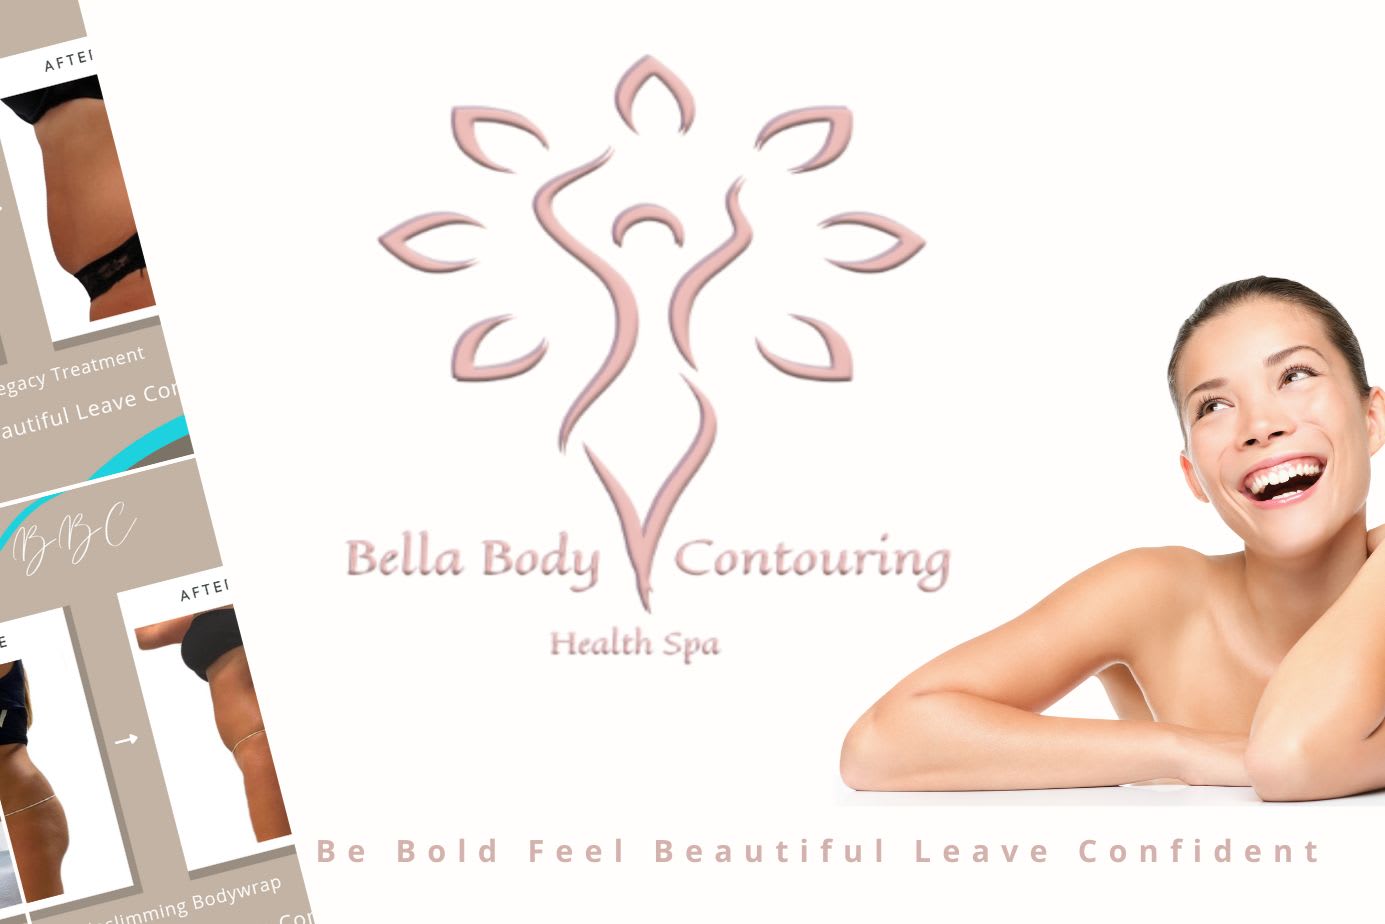 Bellaforever Med Spa  Body Contouring & body sculpting by Certified latin  aestheticians!